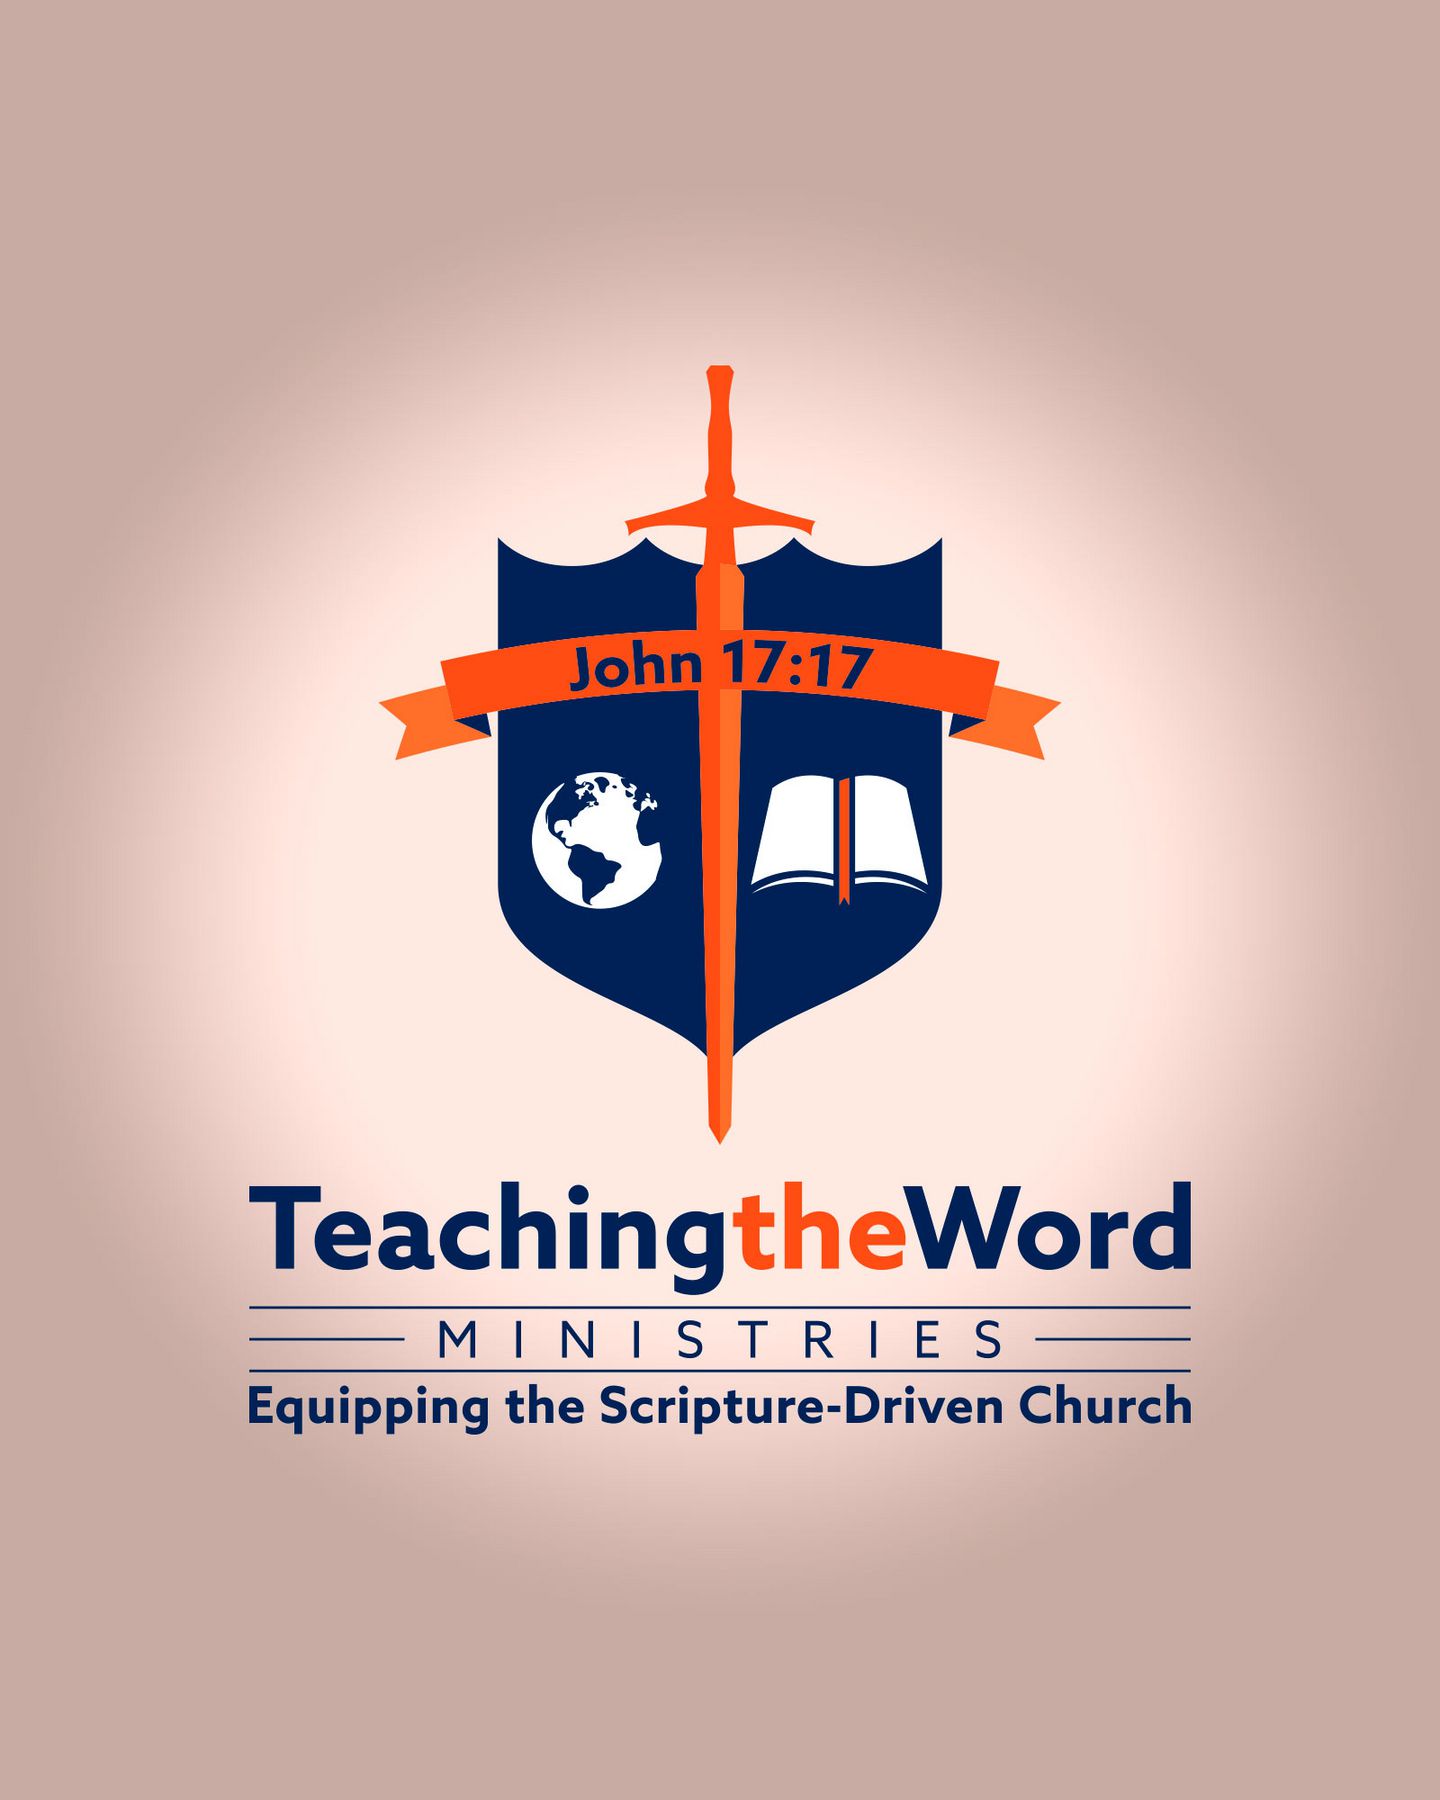 The TeachingTheWord shield and sword logo over a light tan gradient background.